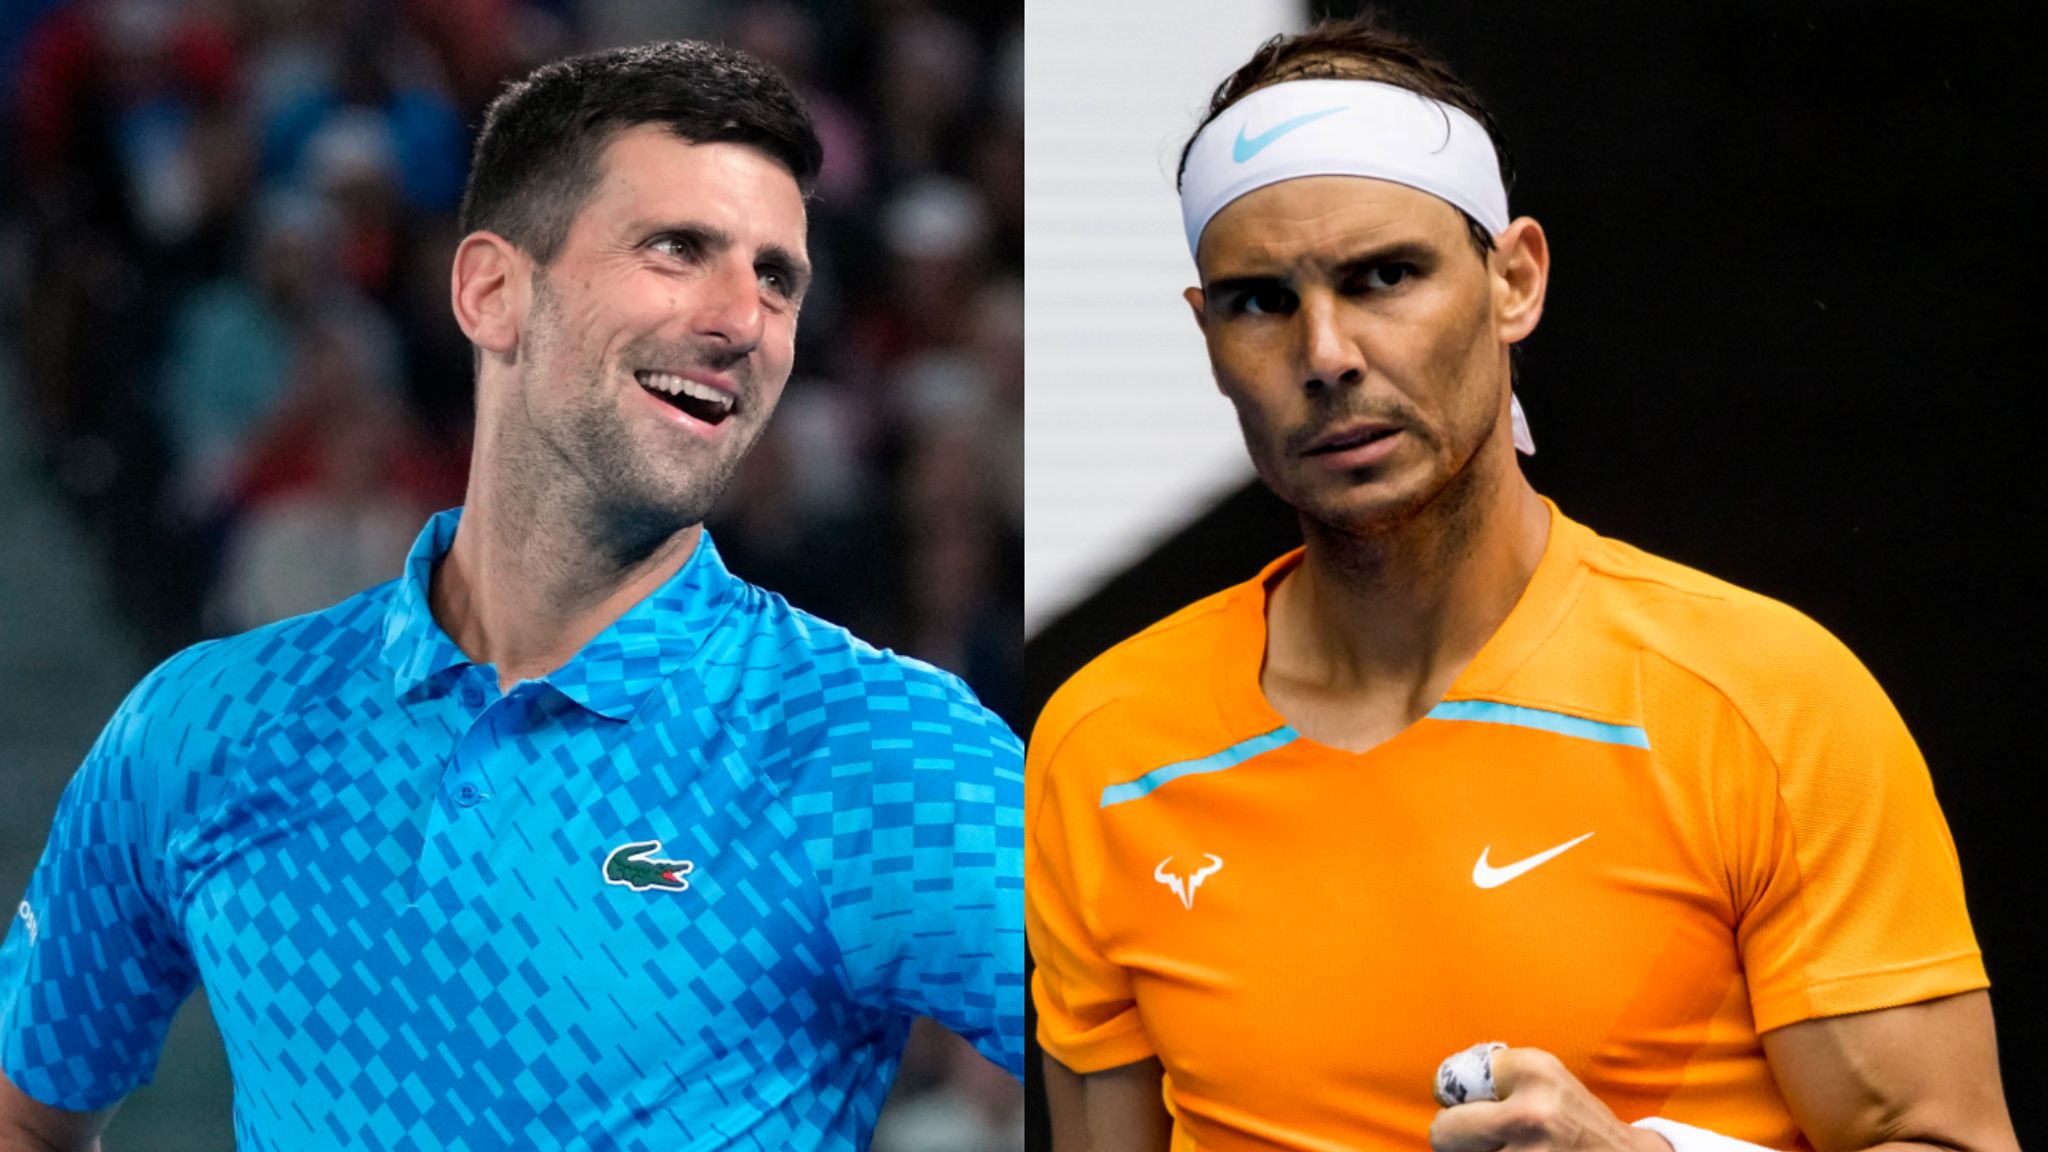 French Open Roland Garros could see Novak Djokovic and Rafael Nadal collide for Grand Slam supremacy Tennis News Sky Sports